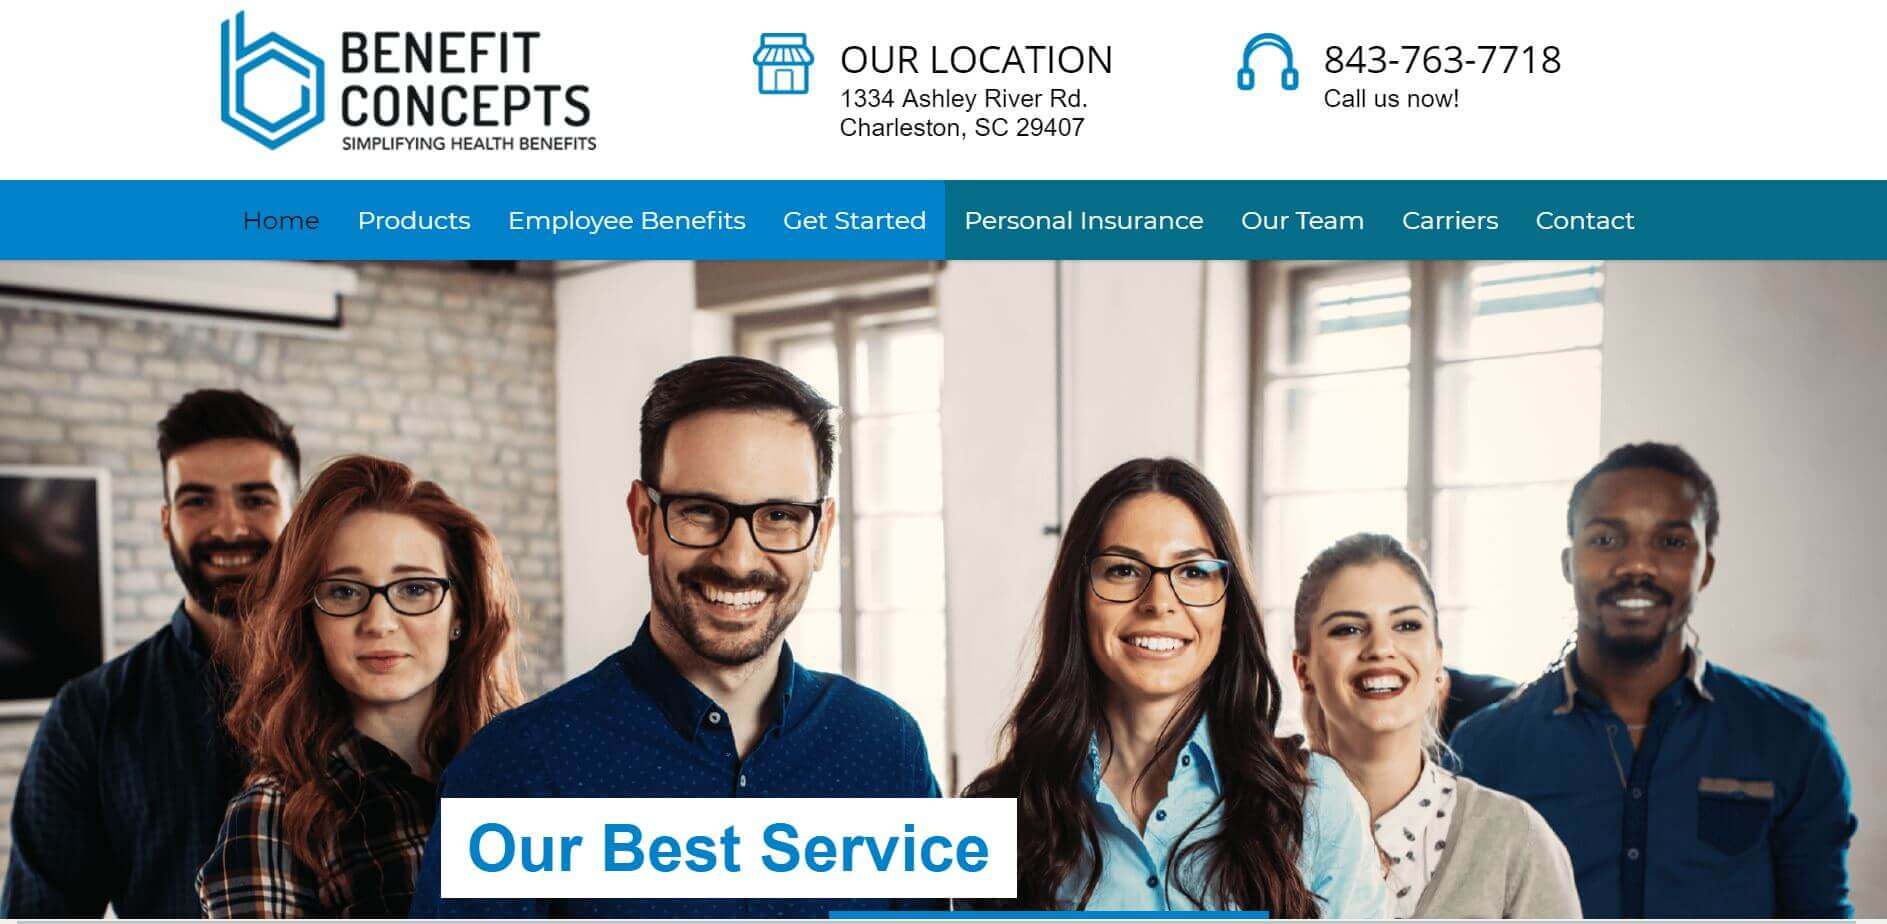 benefit concepts employee benefit company social media in charleston